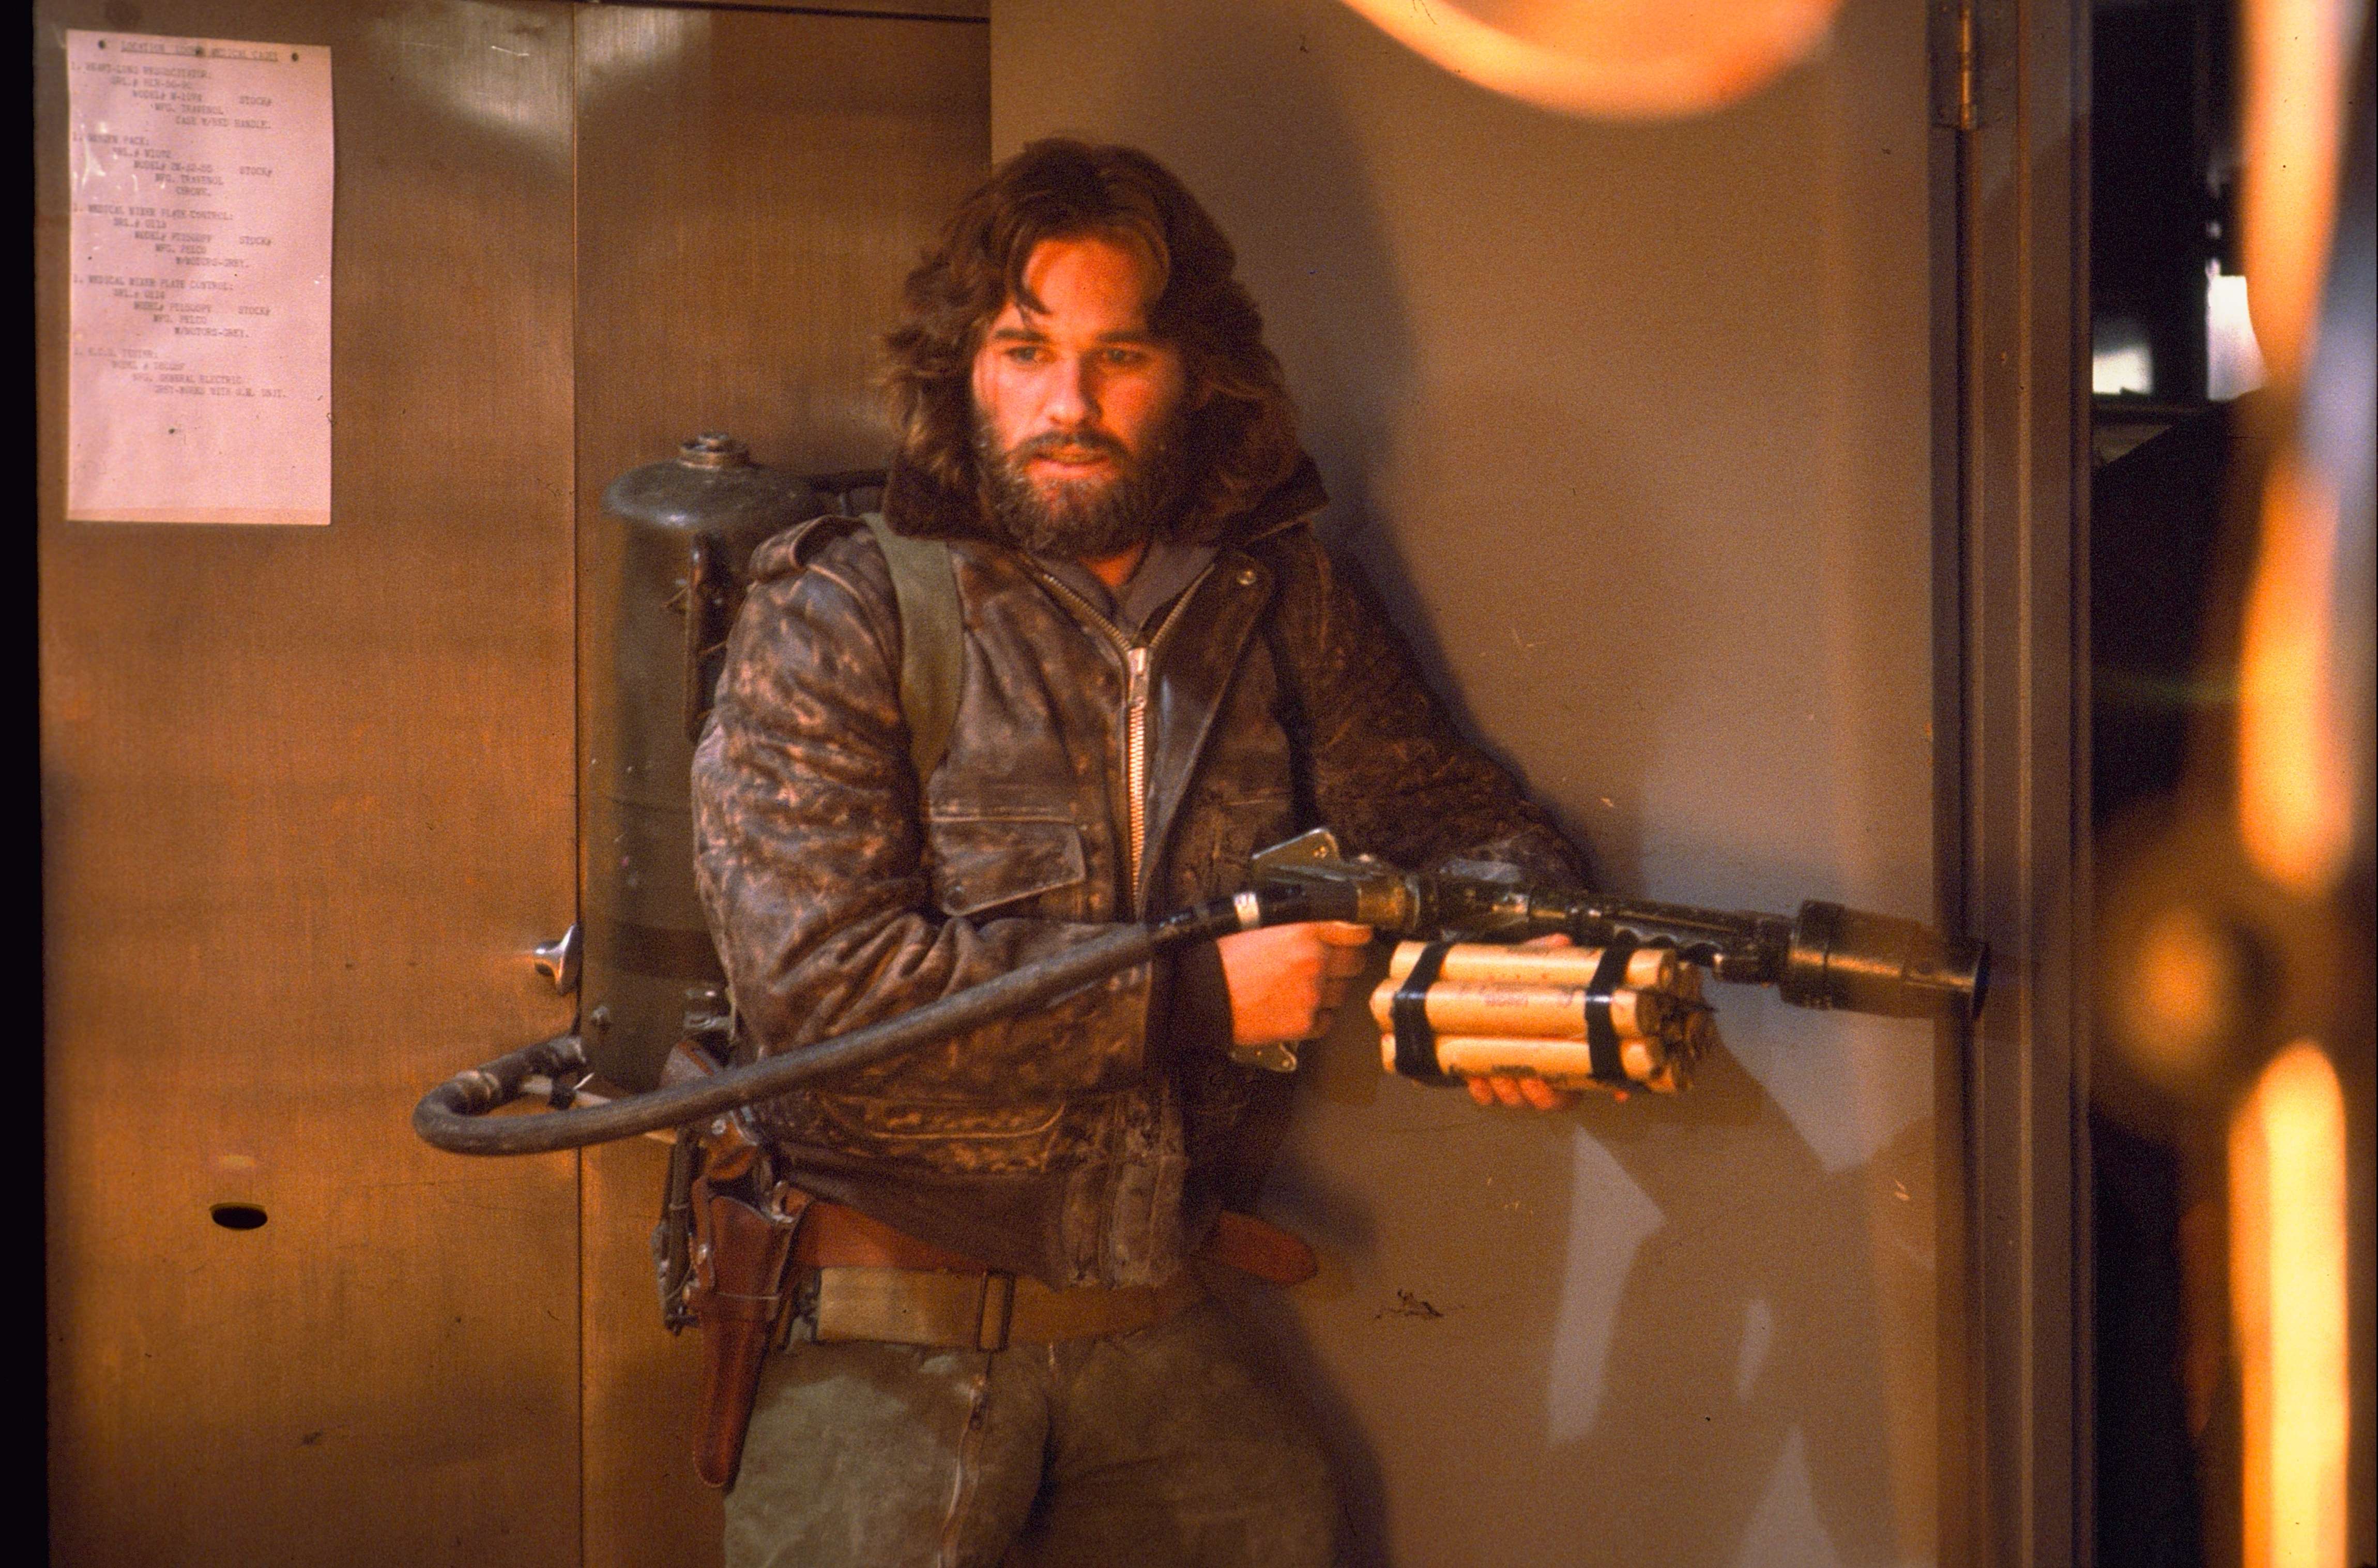 John Carpenter's 'The Thing' Is a Paranoid Classic